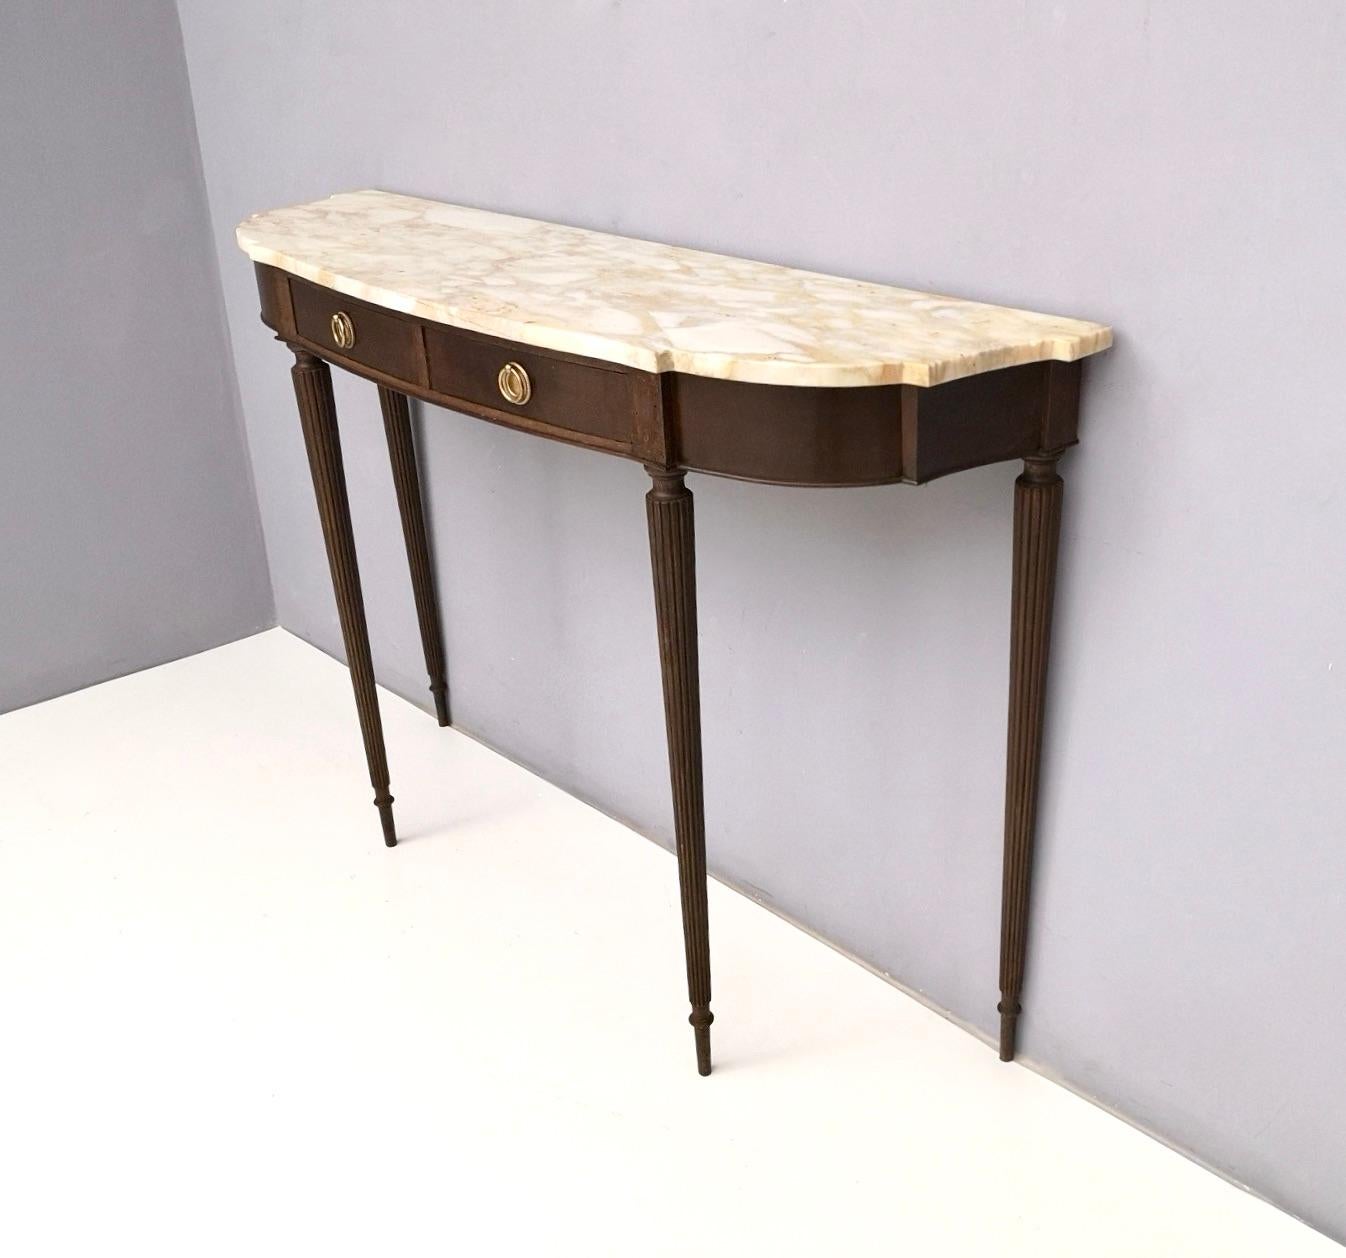 Italian Ebonized Beech Console Table with a Marble Top, 1950s